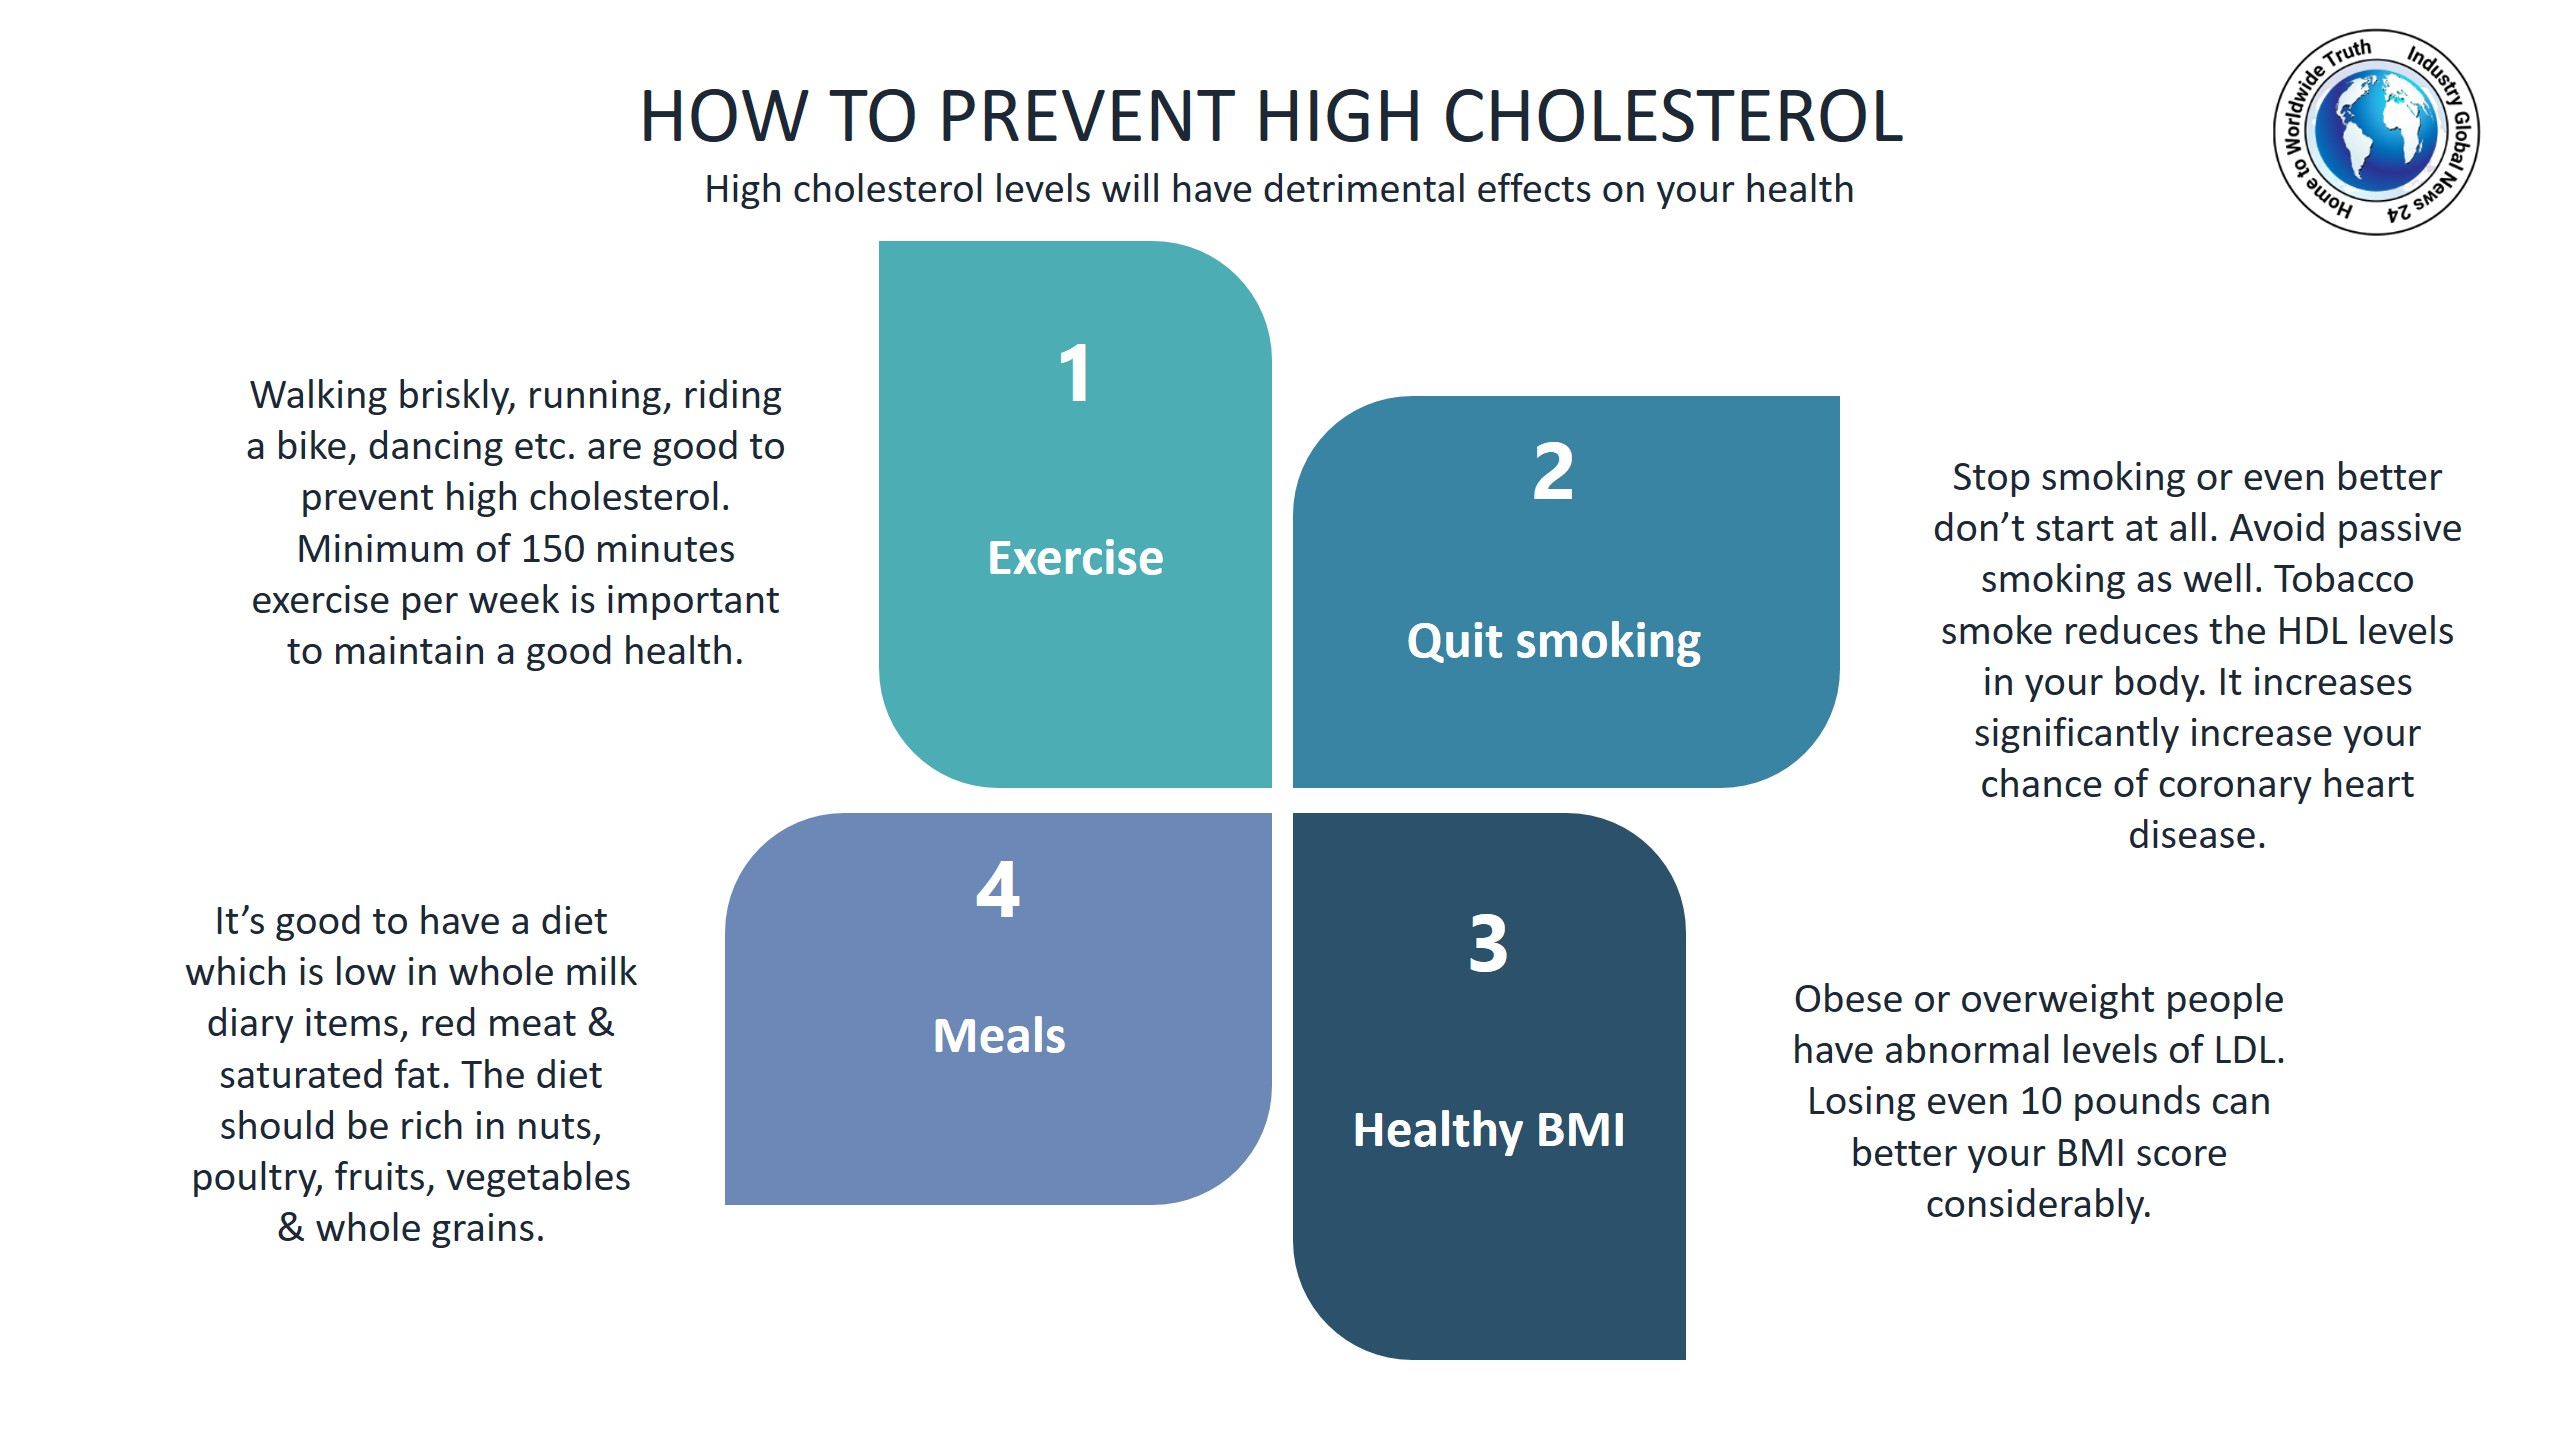 How to prevent high cholesterol